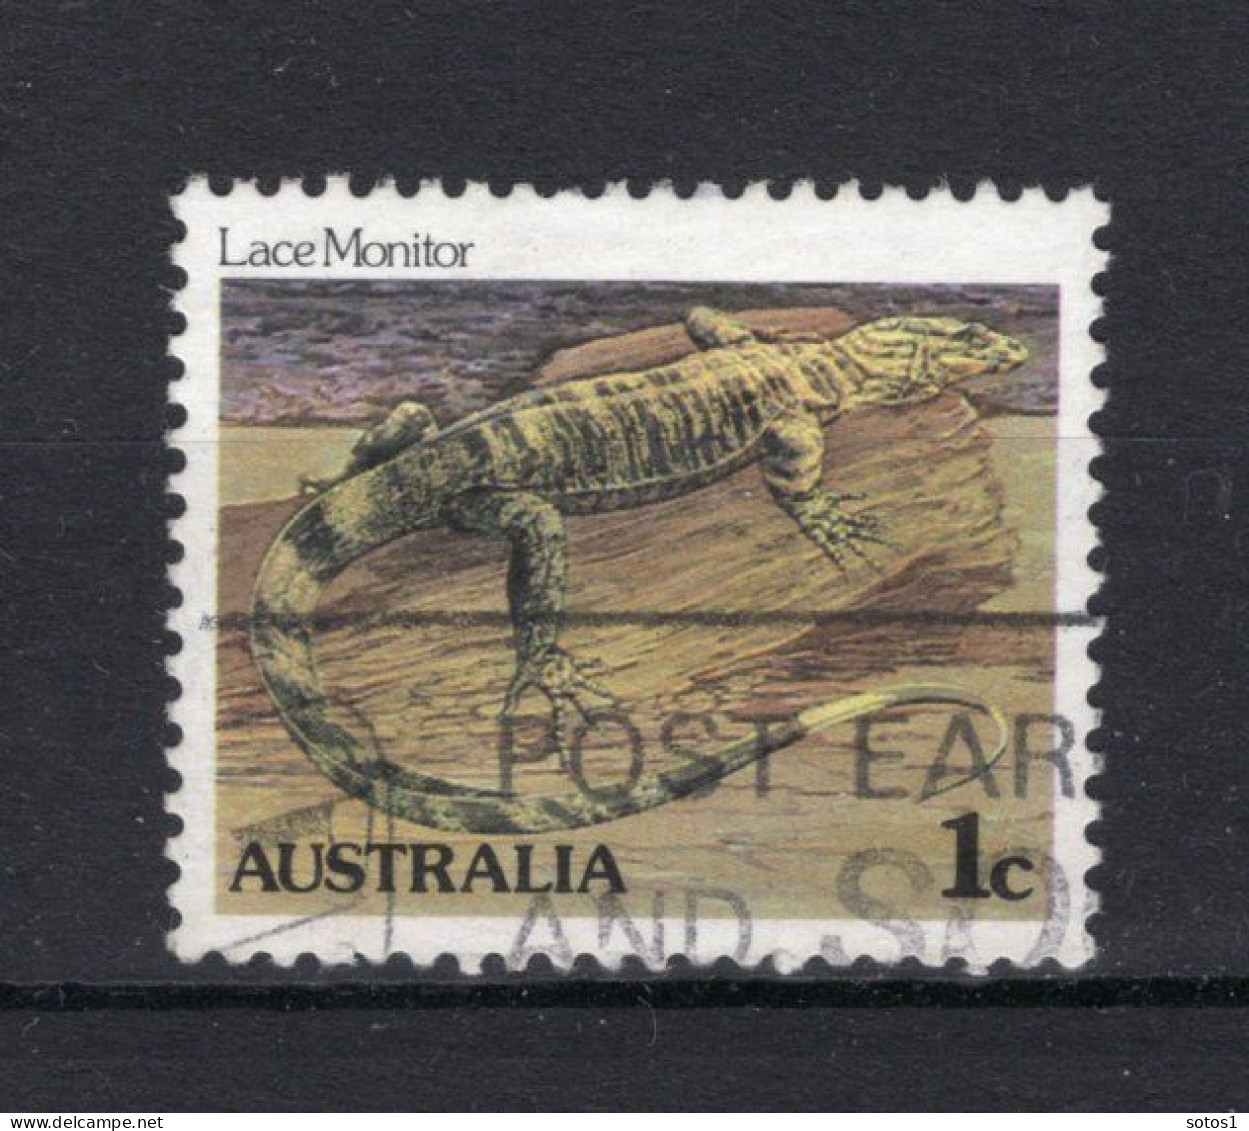 AUSTRALIA Yt. 812° Gestempeld 1983 - Used Stamps